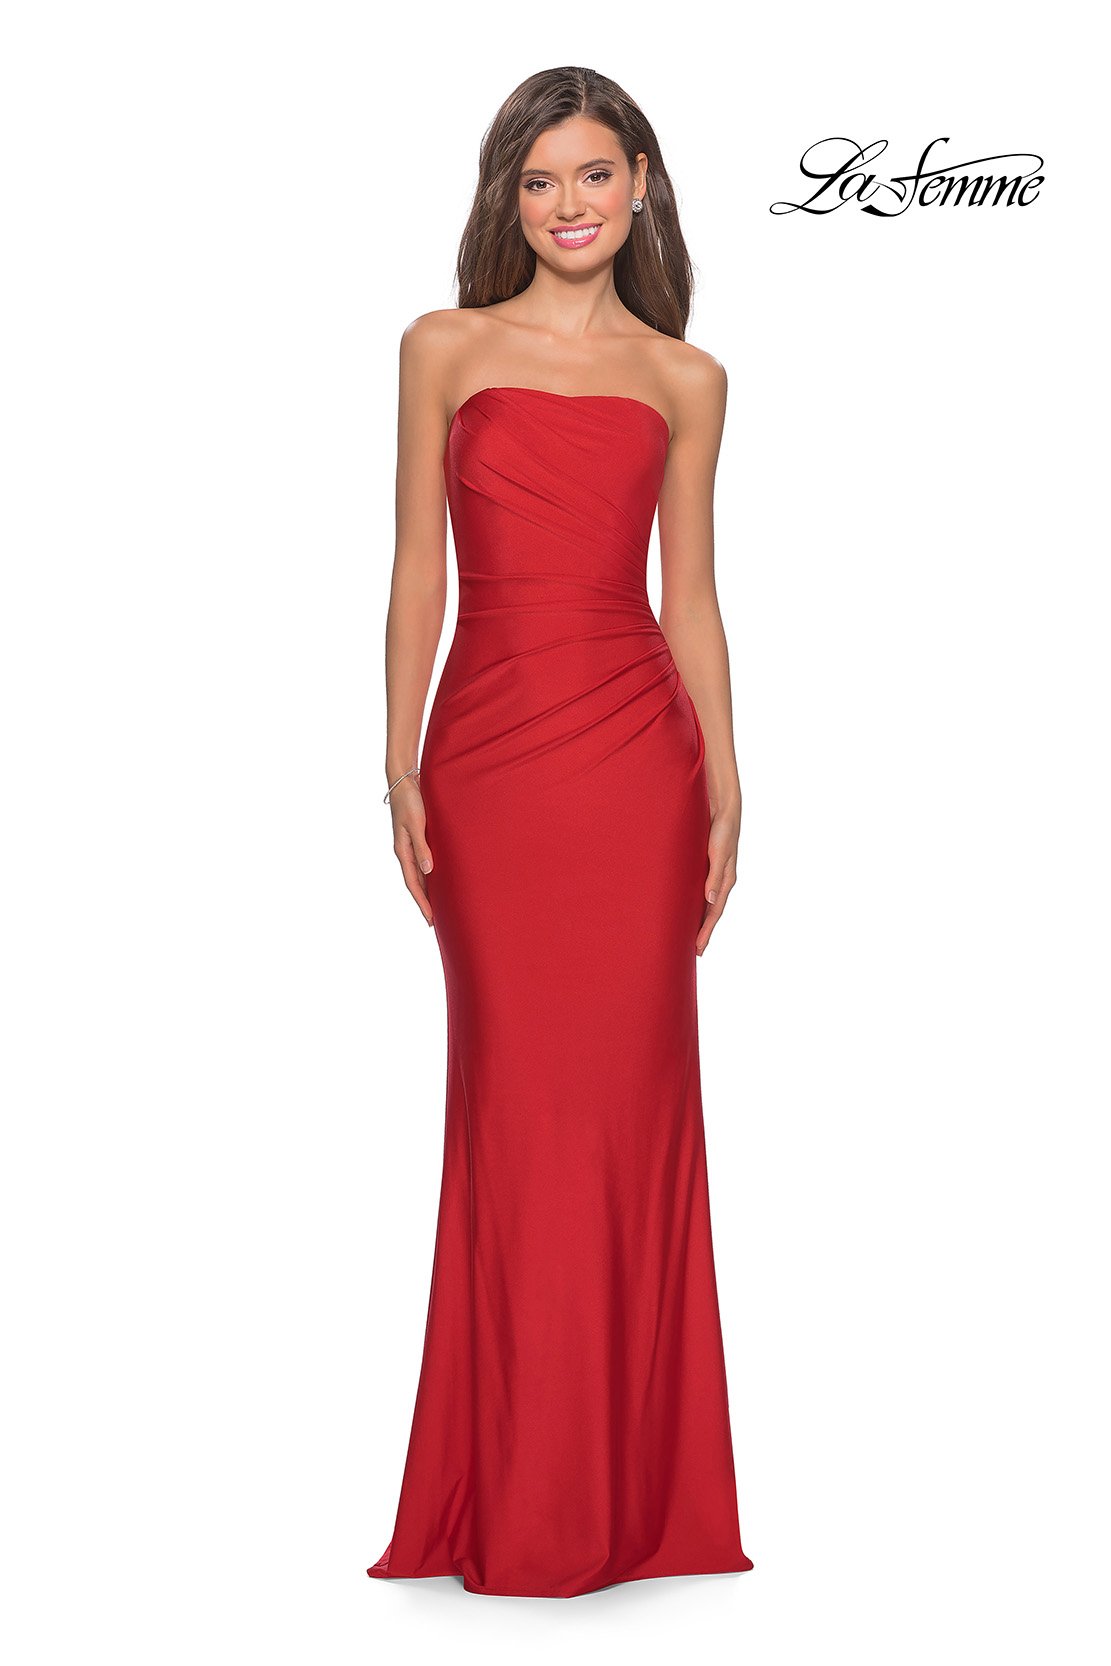 La Femme 28269 dress images in these colors: Dark Berry, Mauve, Red, Royal Blue.